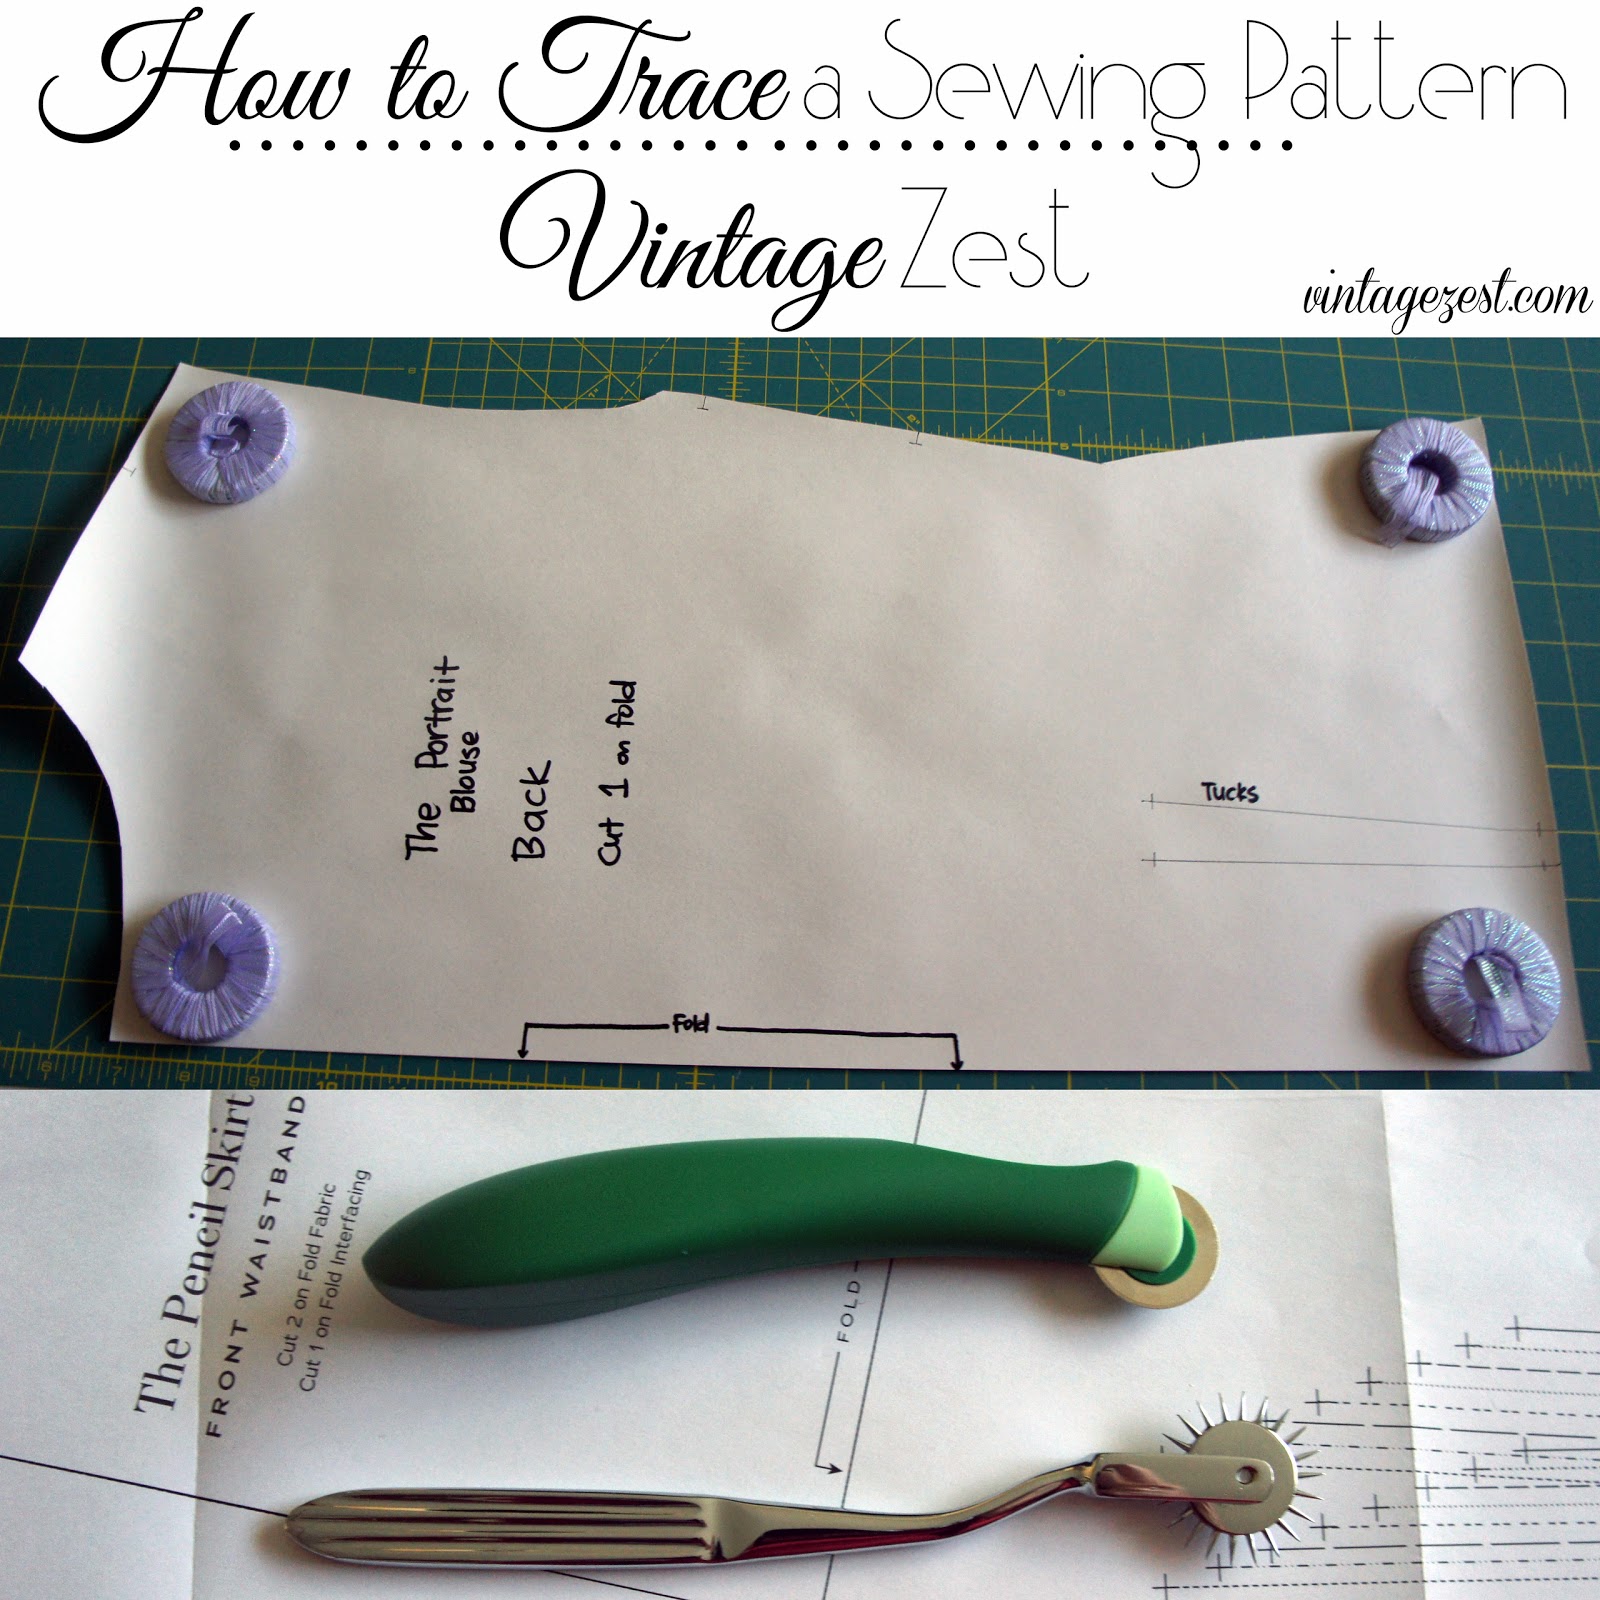 Diane's Vintage Zest!: Tutorial: How to Trace a Sewing Pattern